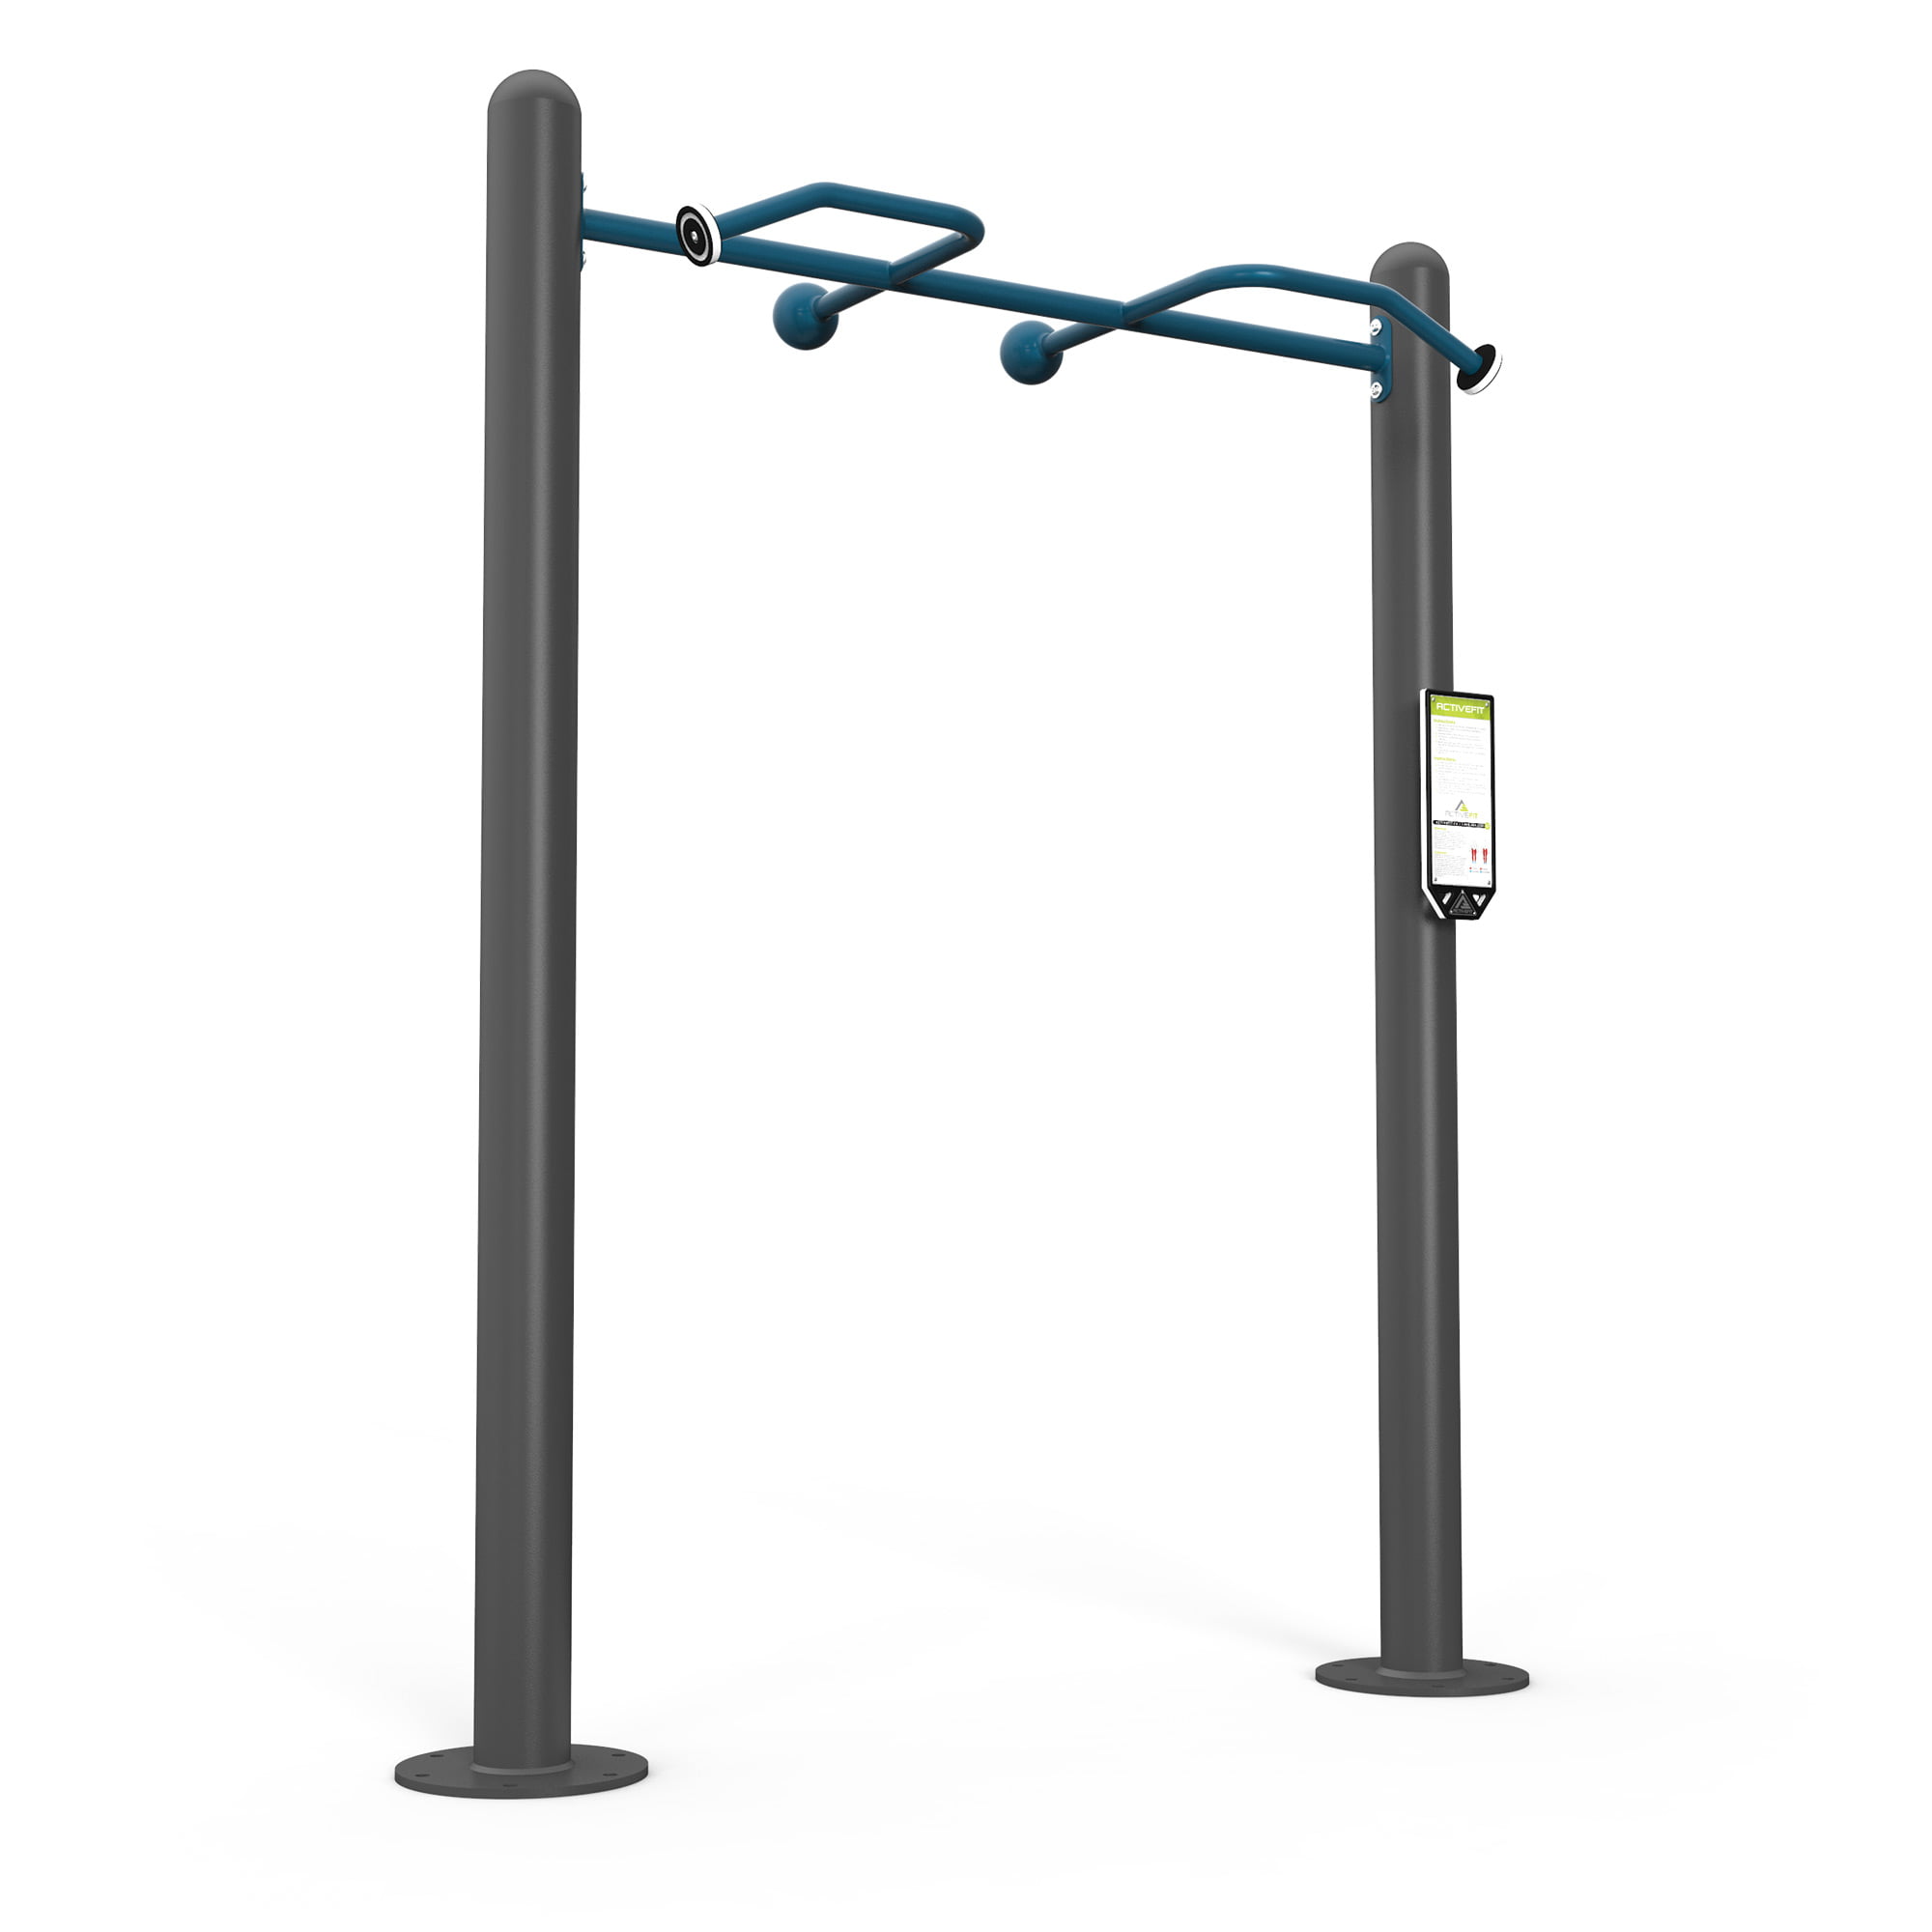 Multi-Grip Pull Up Bars - ActiveFit Outdoor Fitness Equipment